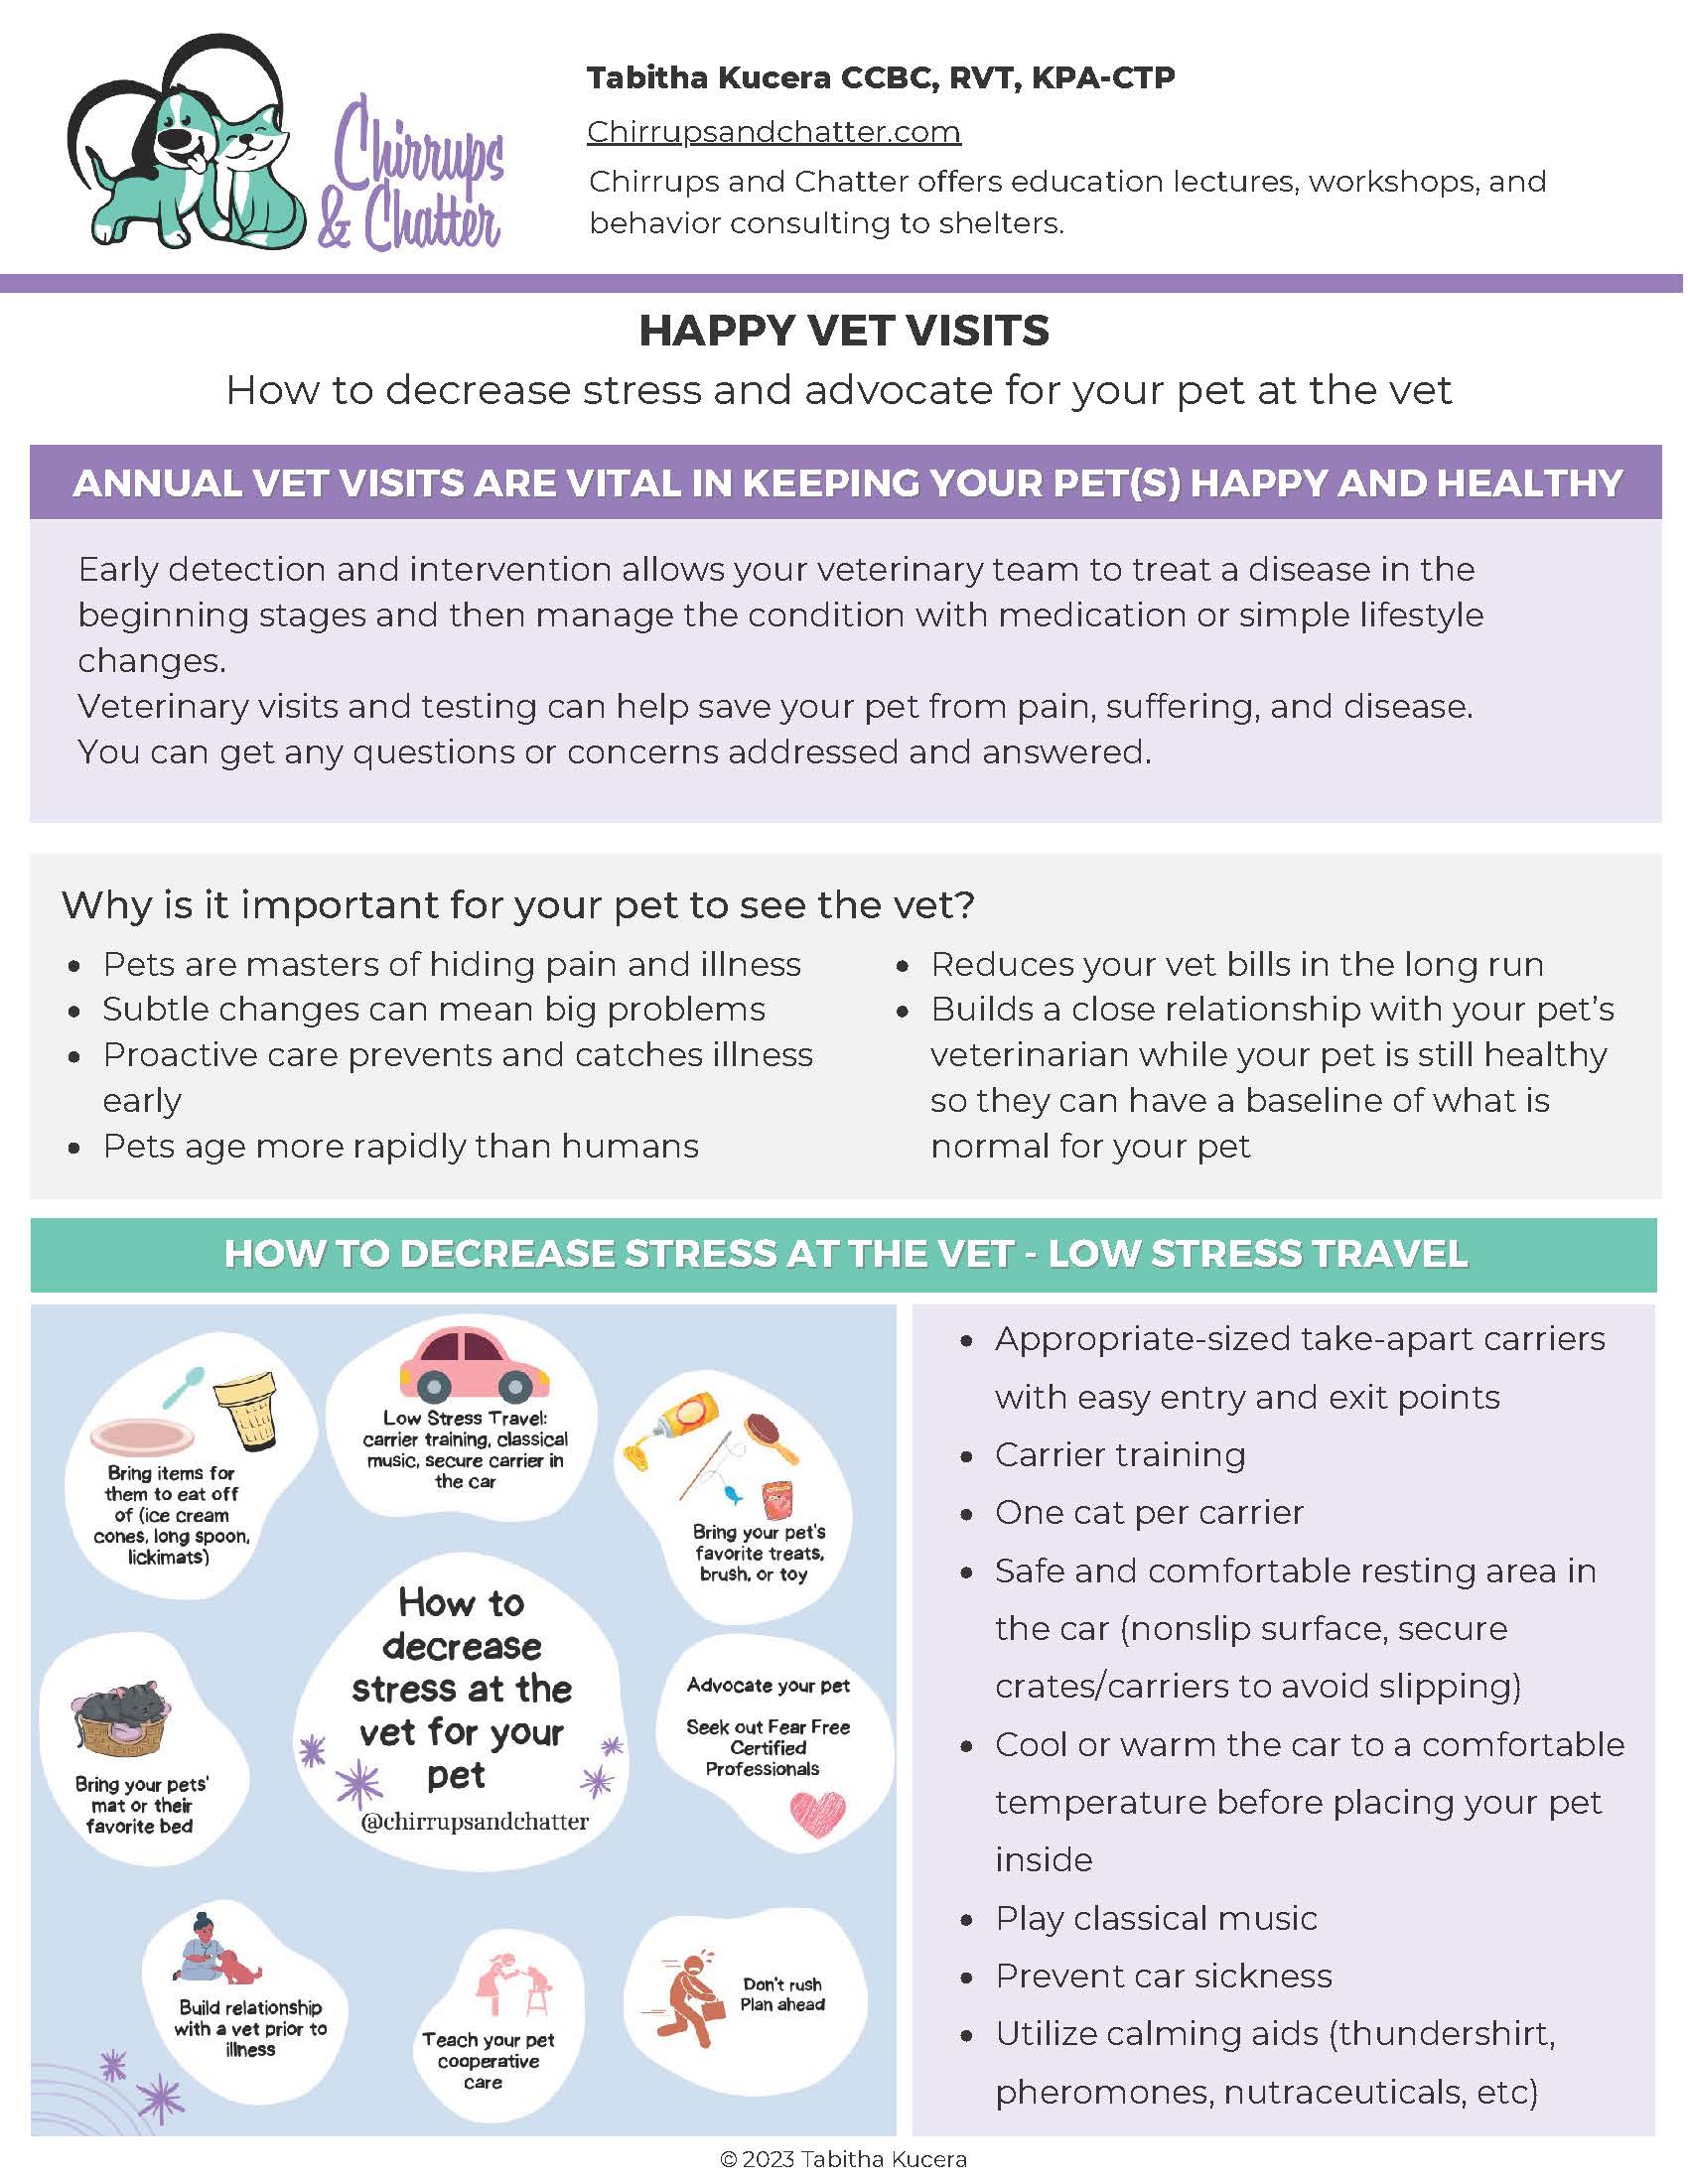 Cover image of Happy Vet Visits handout.